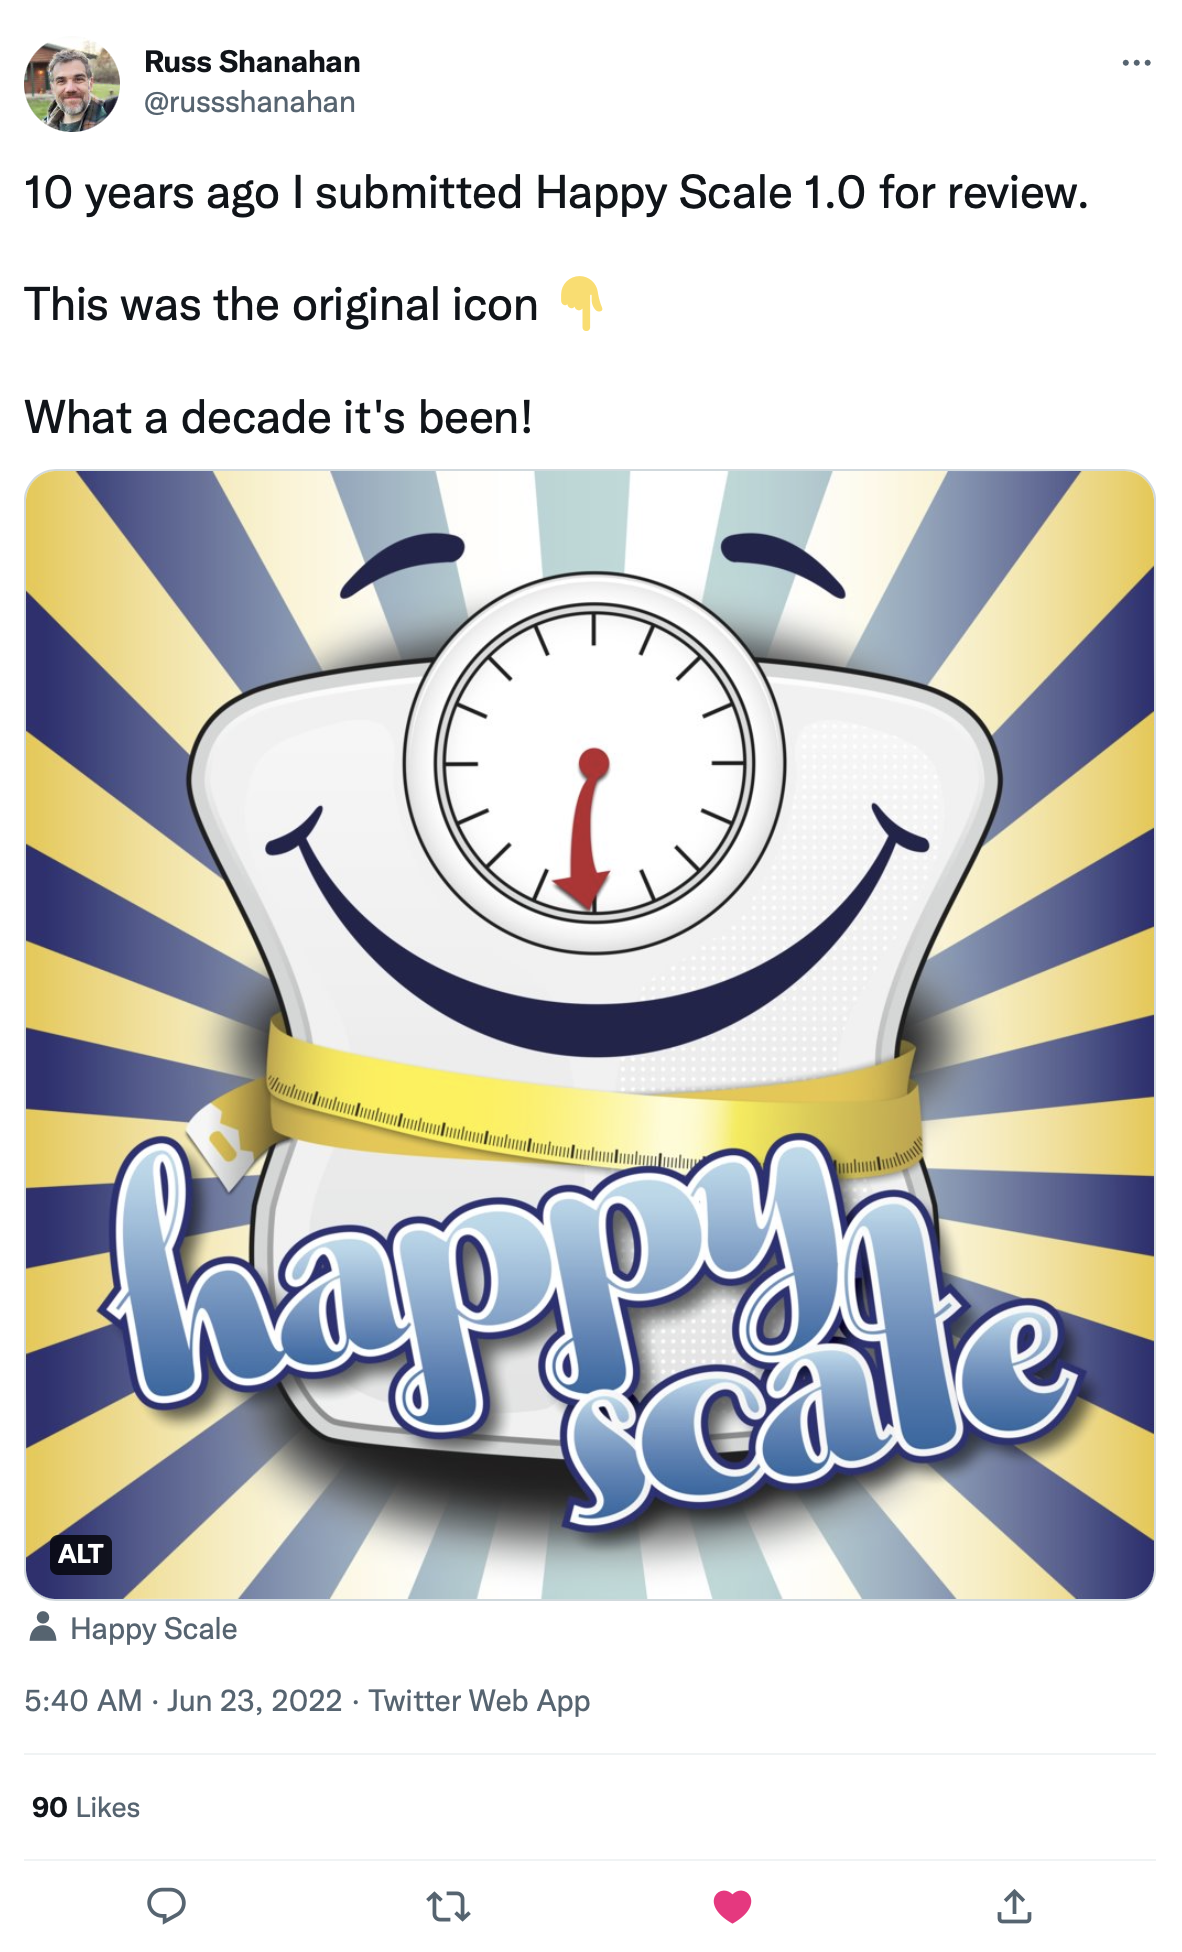 Russ Shanahan shares the original app icon for his app Happy Scale